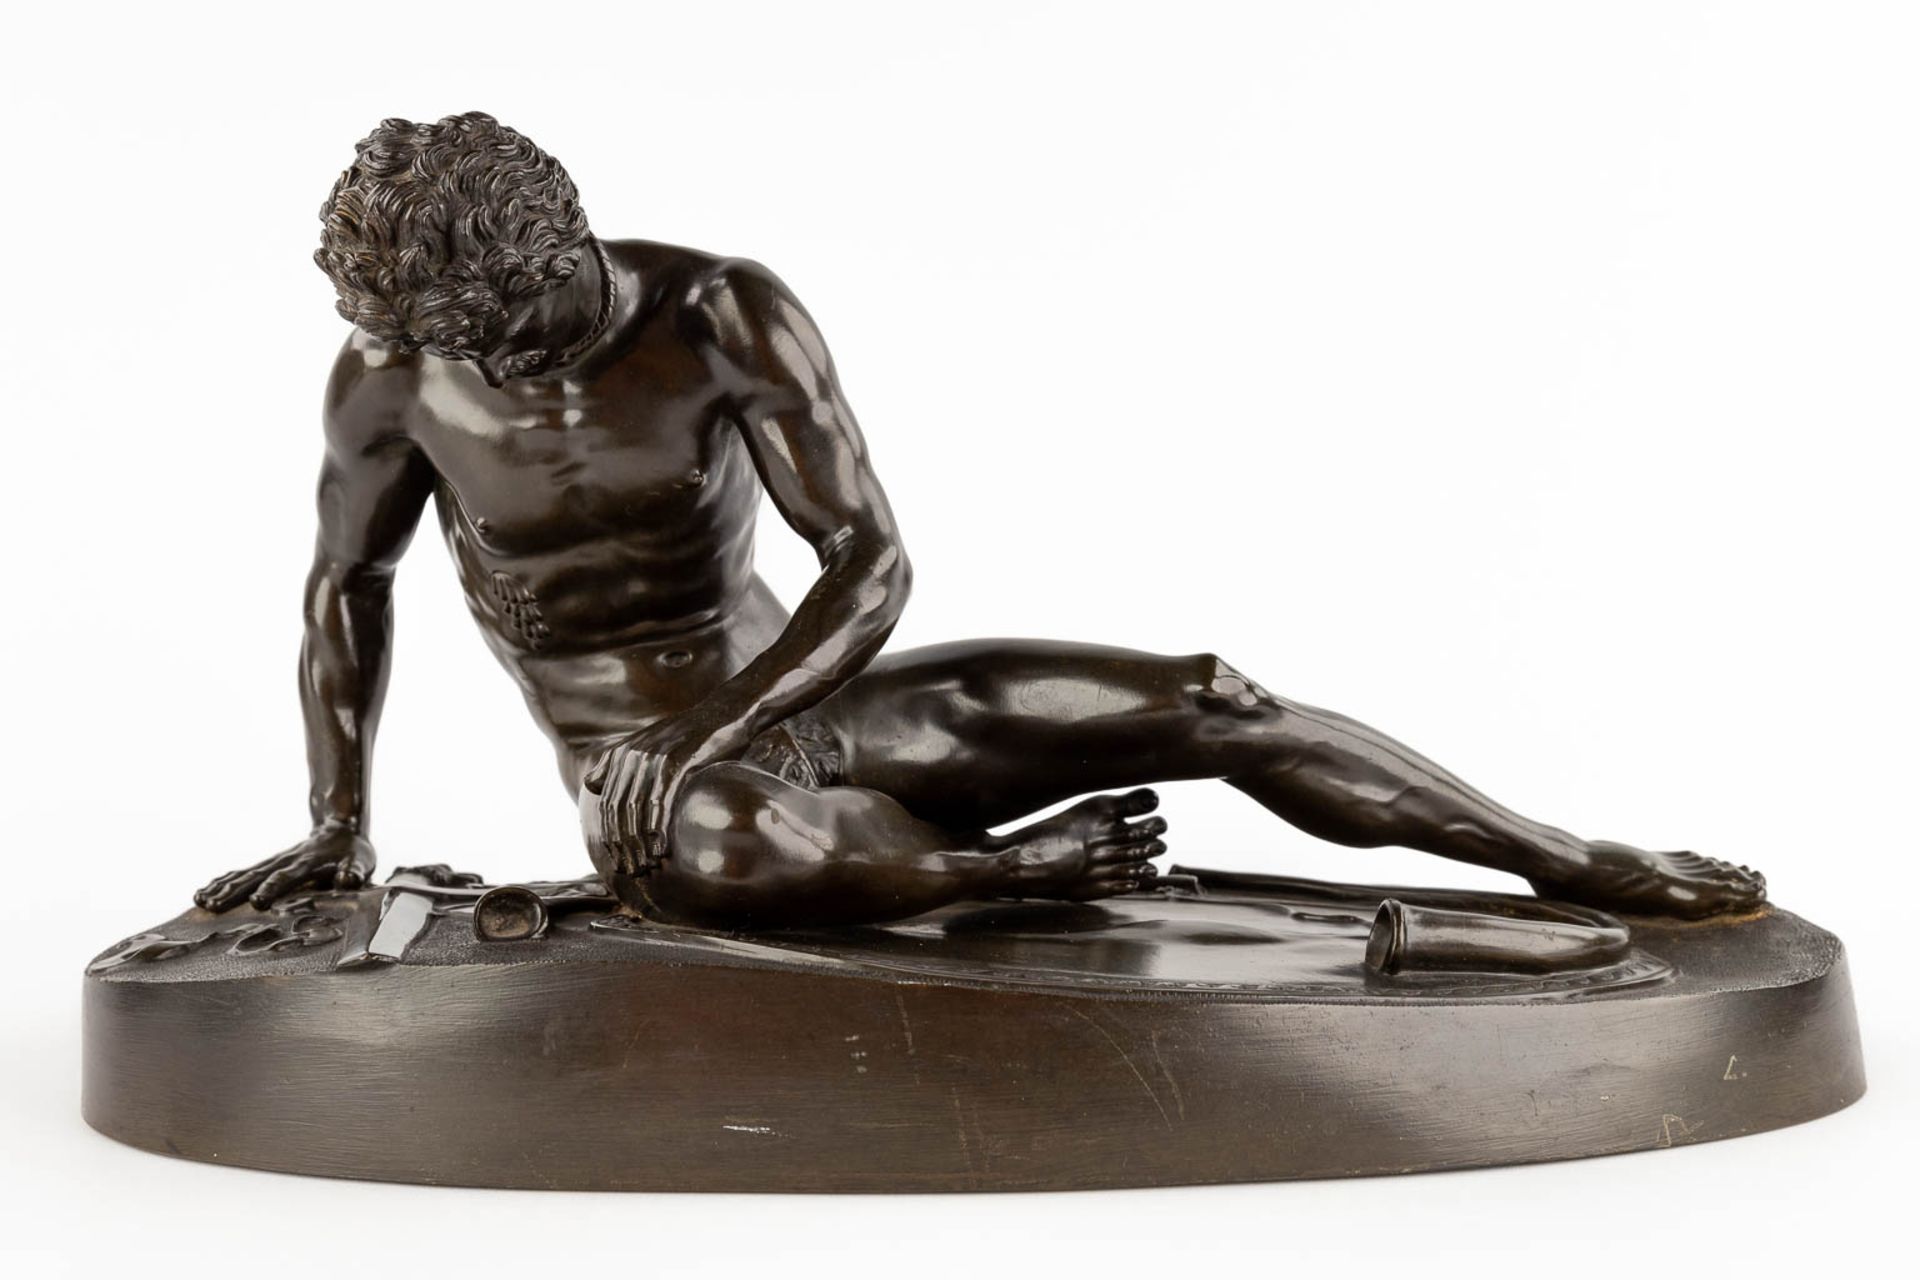 After an antique statue 'The Dying Gaul' patinated bronze. 19th/20th C. (D:21 x W:46 x H:24 cm) - Image 3 of 11